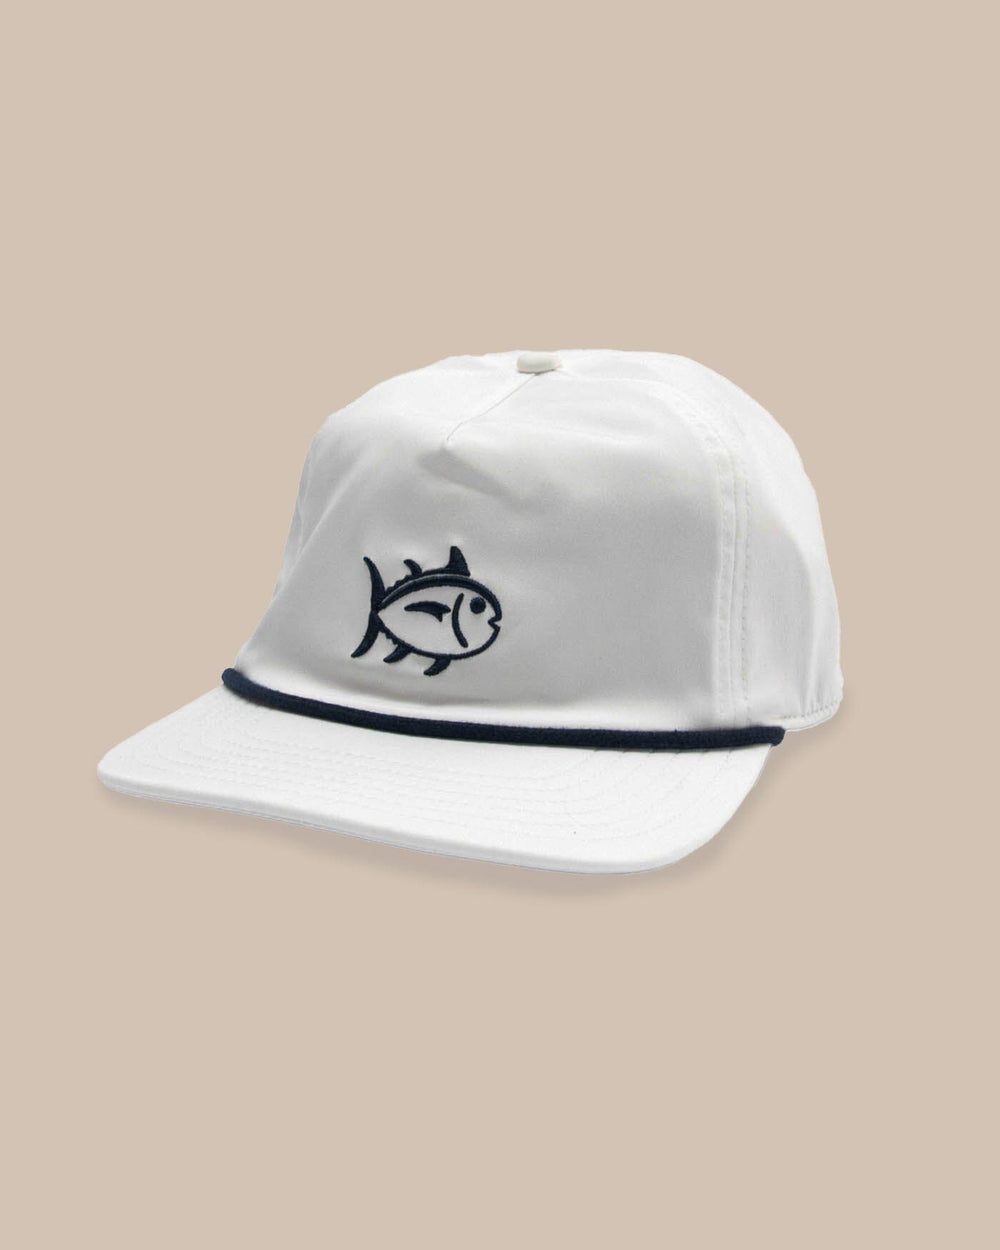 The front view of the Southern Tide 18 Holes 5 Panel Hat by Southern Tide - White